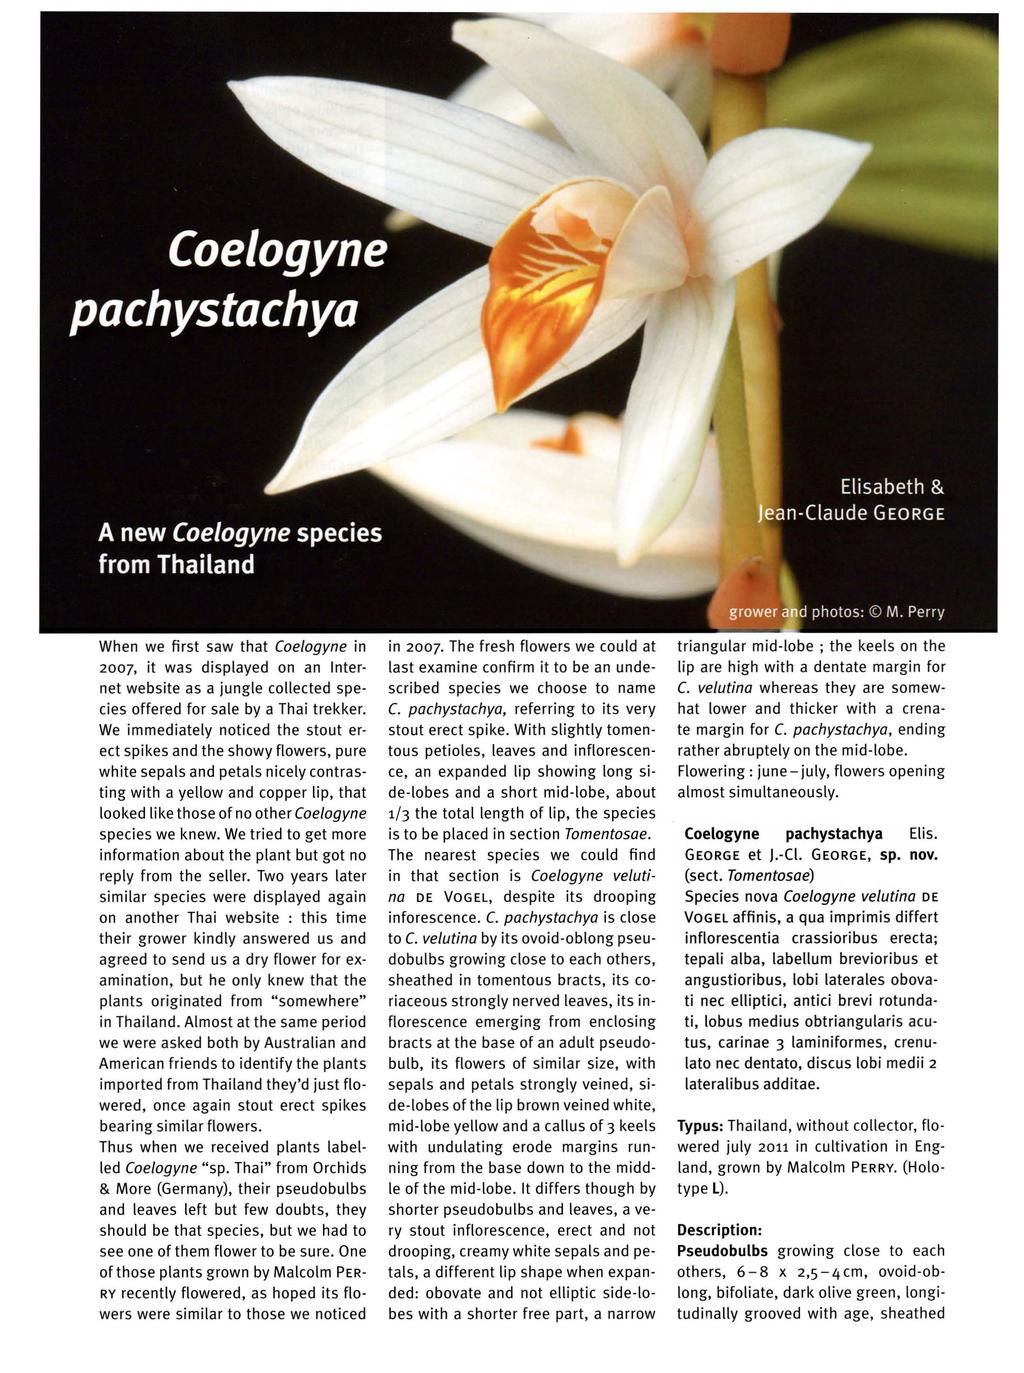 When we first saw that Coe/ogyne in 2007, it was displayed on an Internet website as a jungle collected species offered for sale by a Thai trekker.